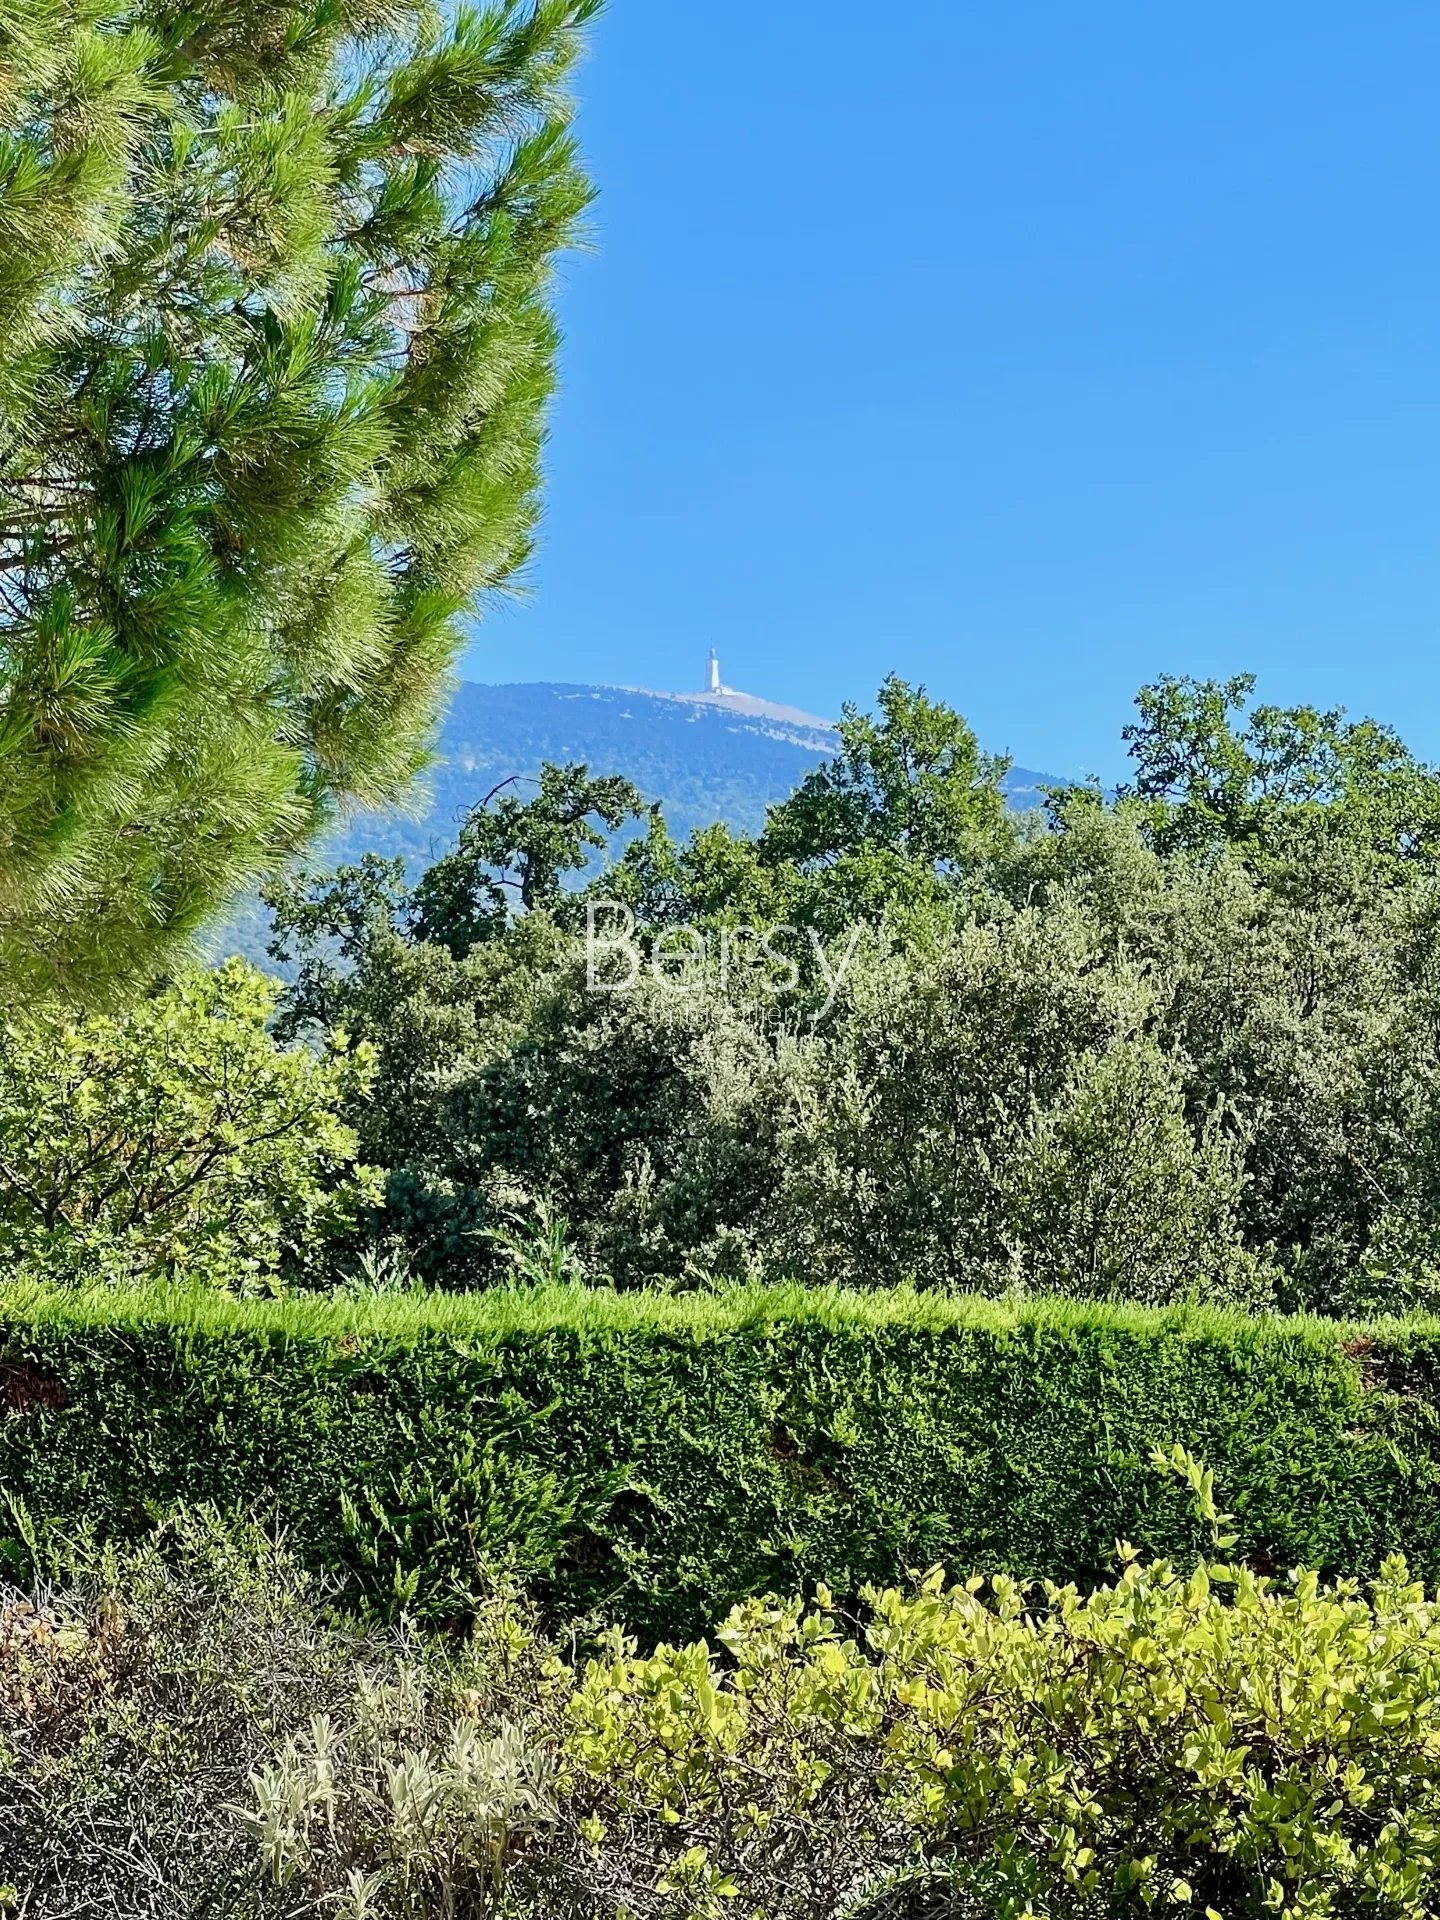 LOVERS OF VENTOUX, NATURE and the VILLAGE OF BEDOIN